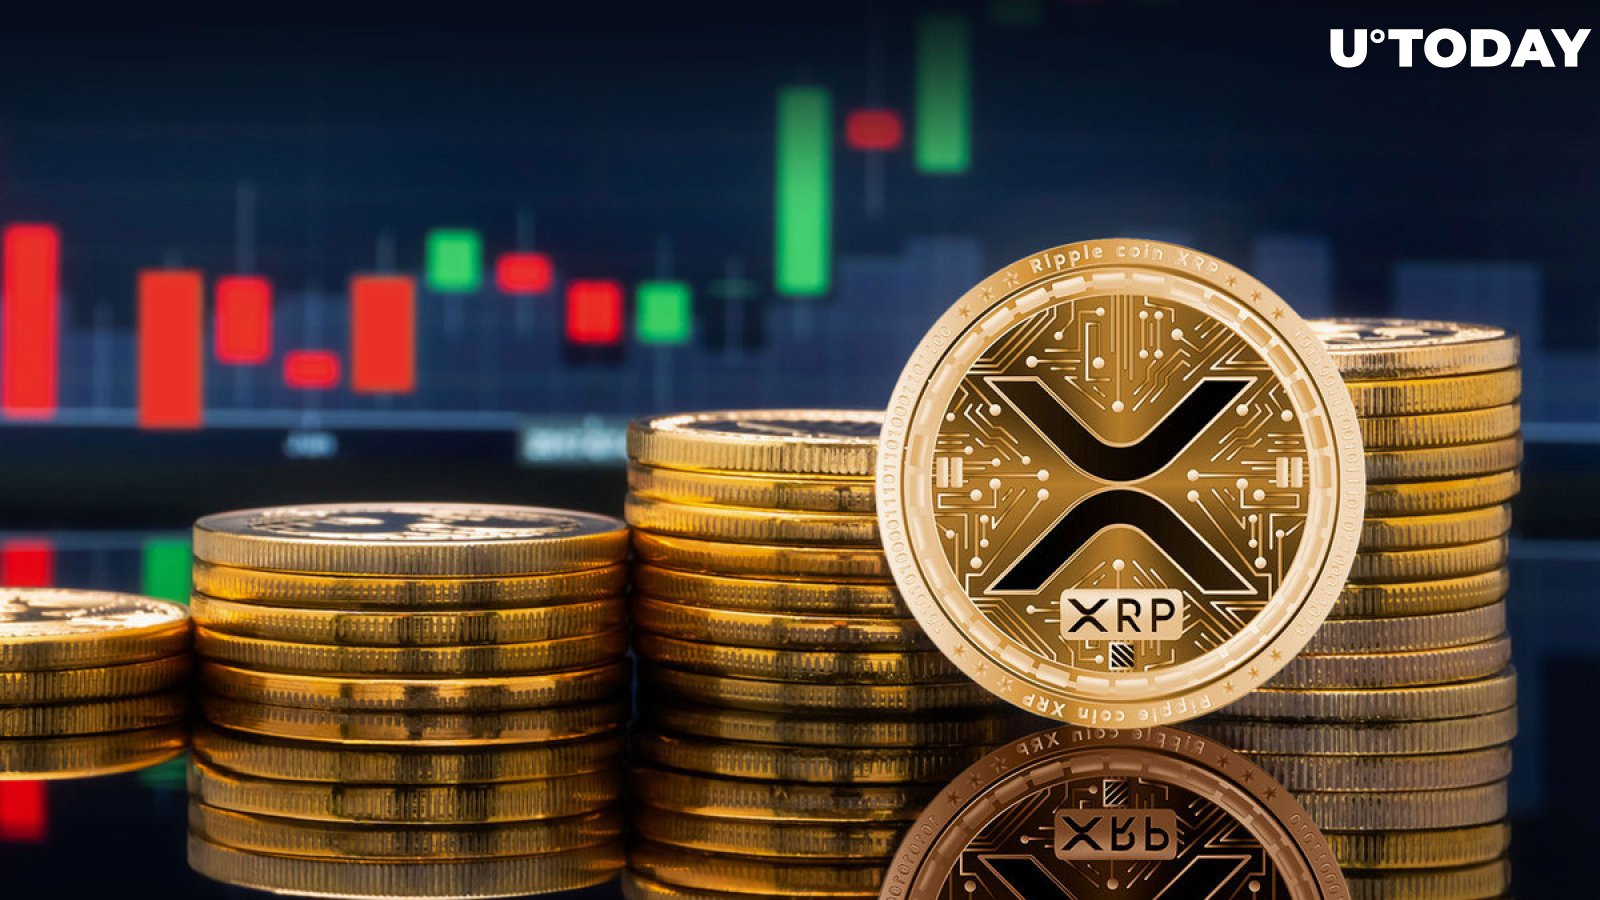 XRP Price Recovers With $3.5 Billion Boost Amid 220% Volume Surge